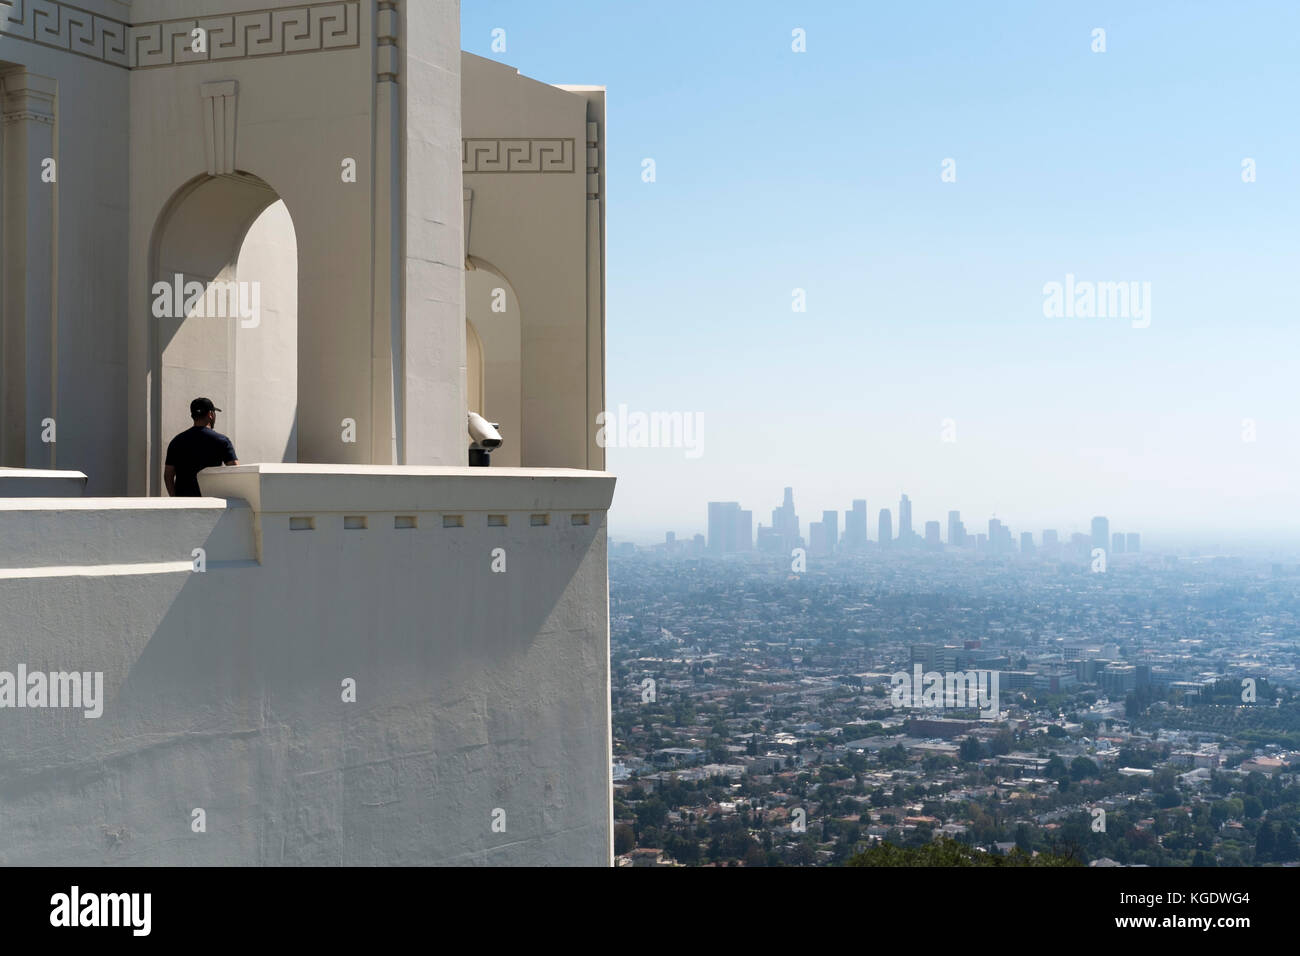 Man n baseball cap at the Griffith Observatory, Hollywood, Los Angeles, California Stock Photo